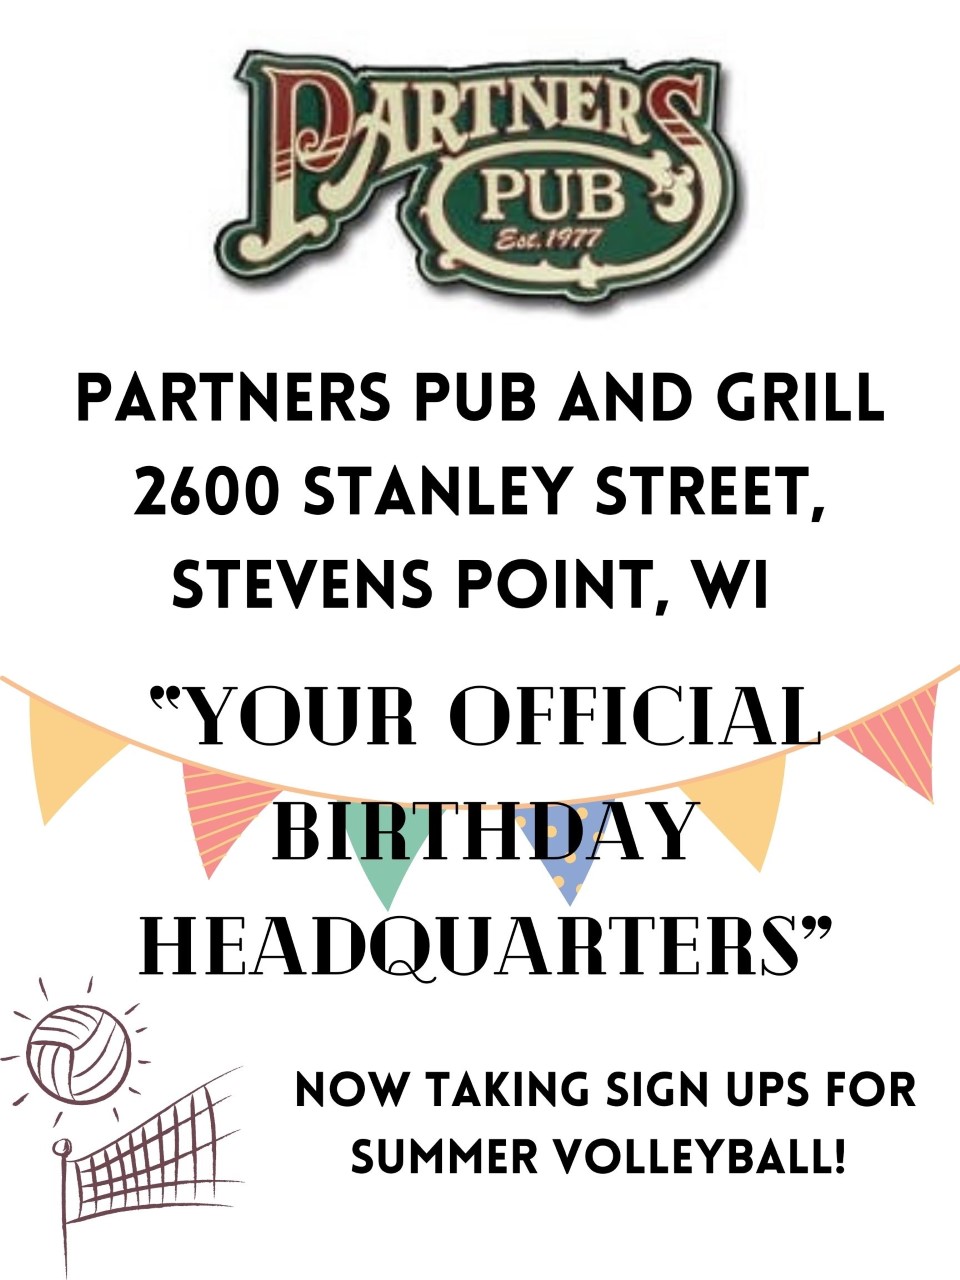 Partners Pub and Grill